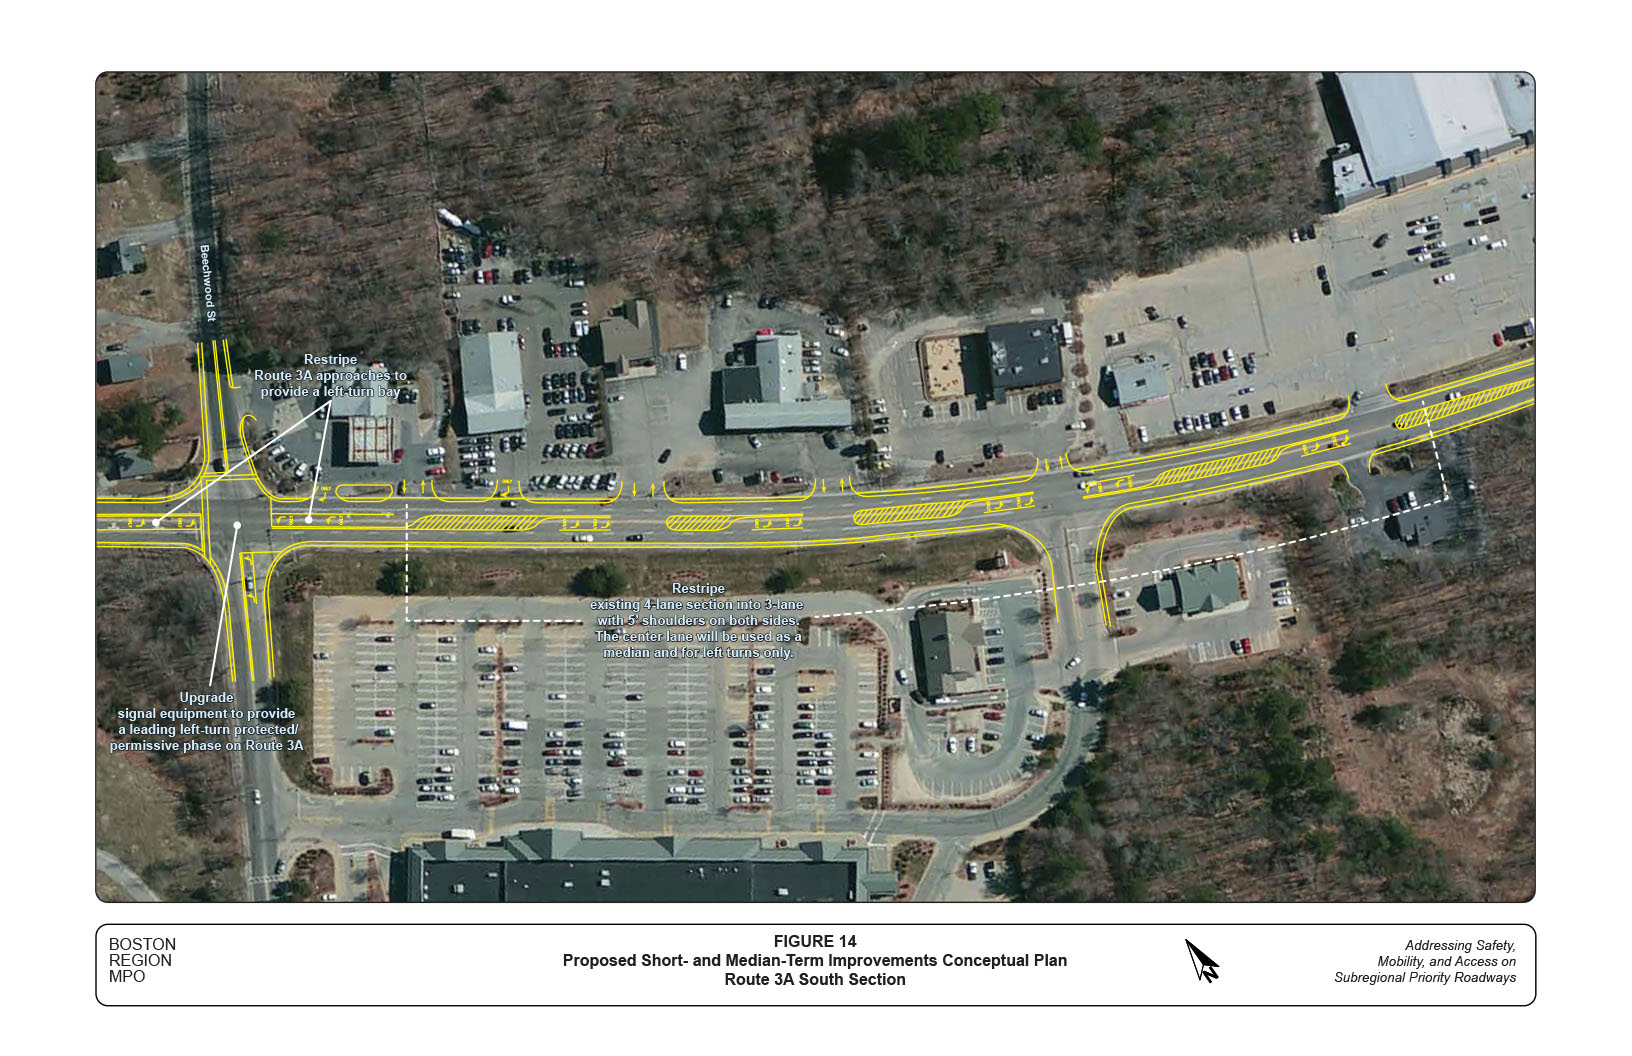 Figure 14 is an aerial view map that depicts the proposed medium-term improvements for the Beechwood Street intersection and the section south of Beechwood Street.